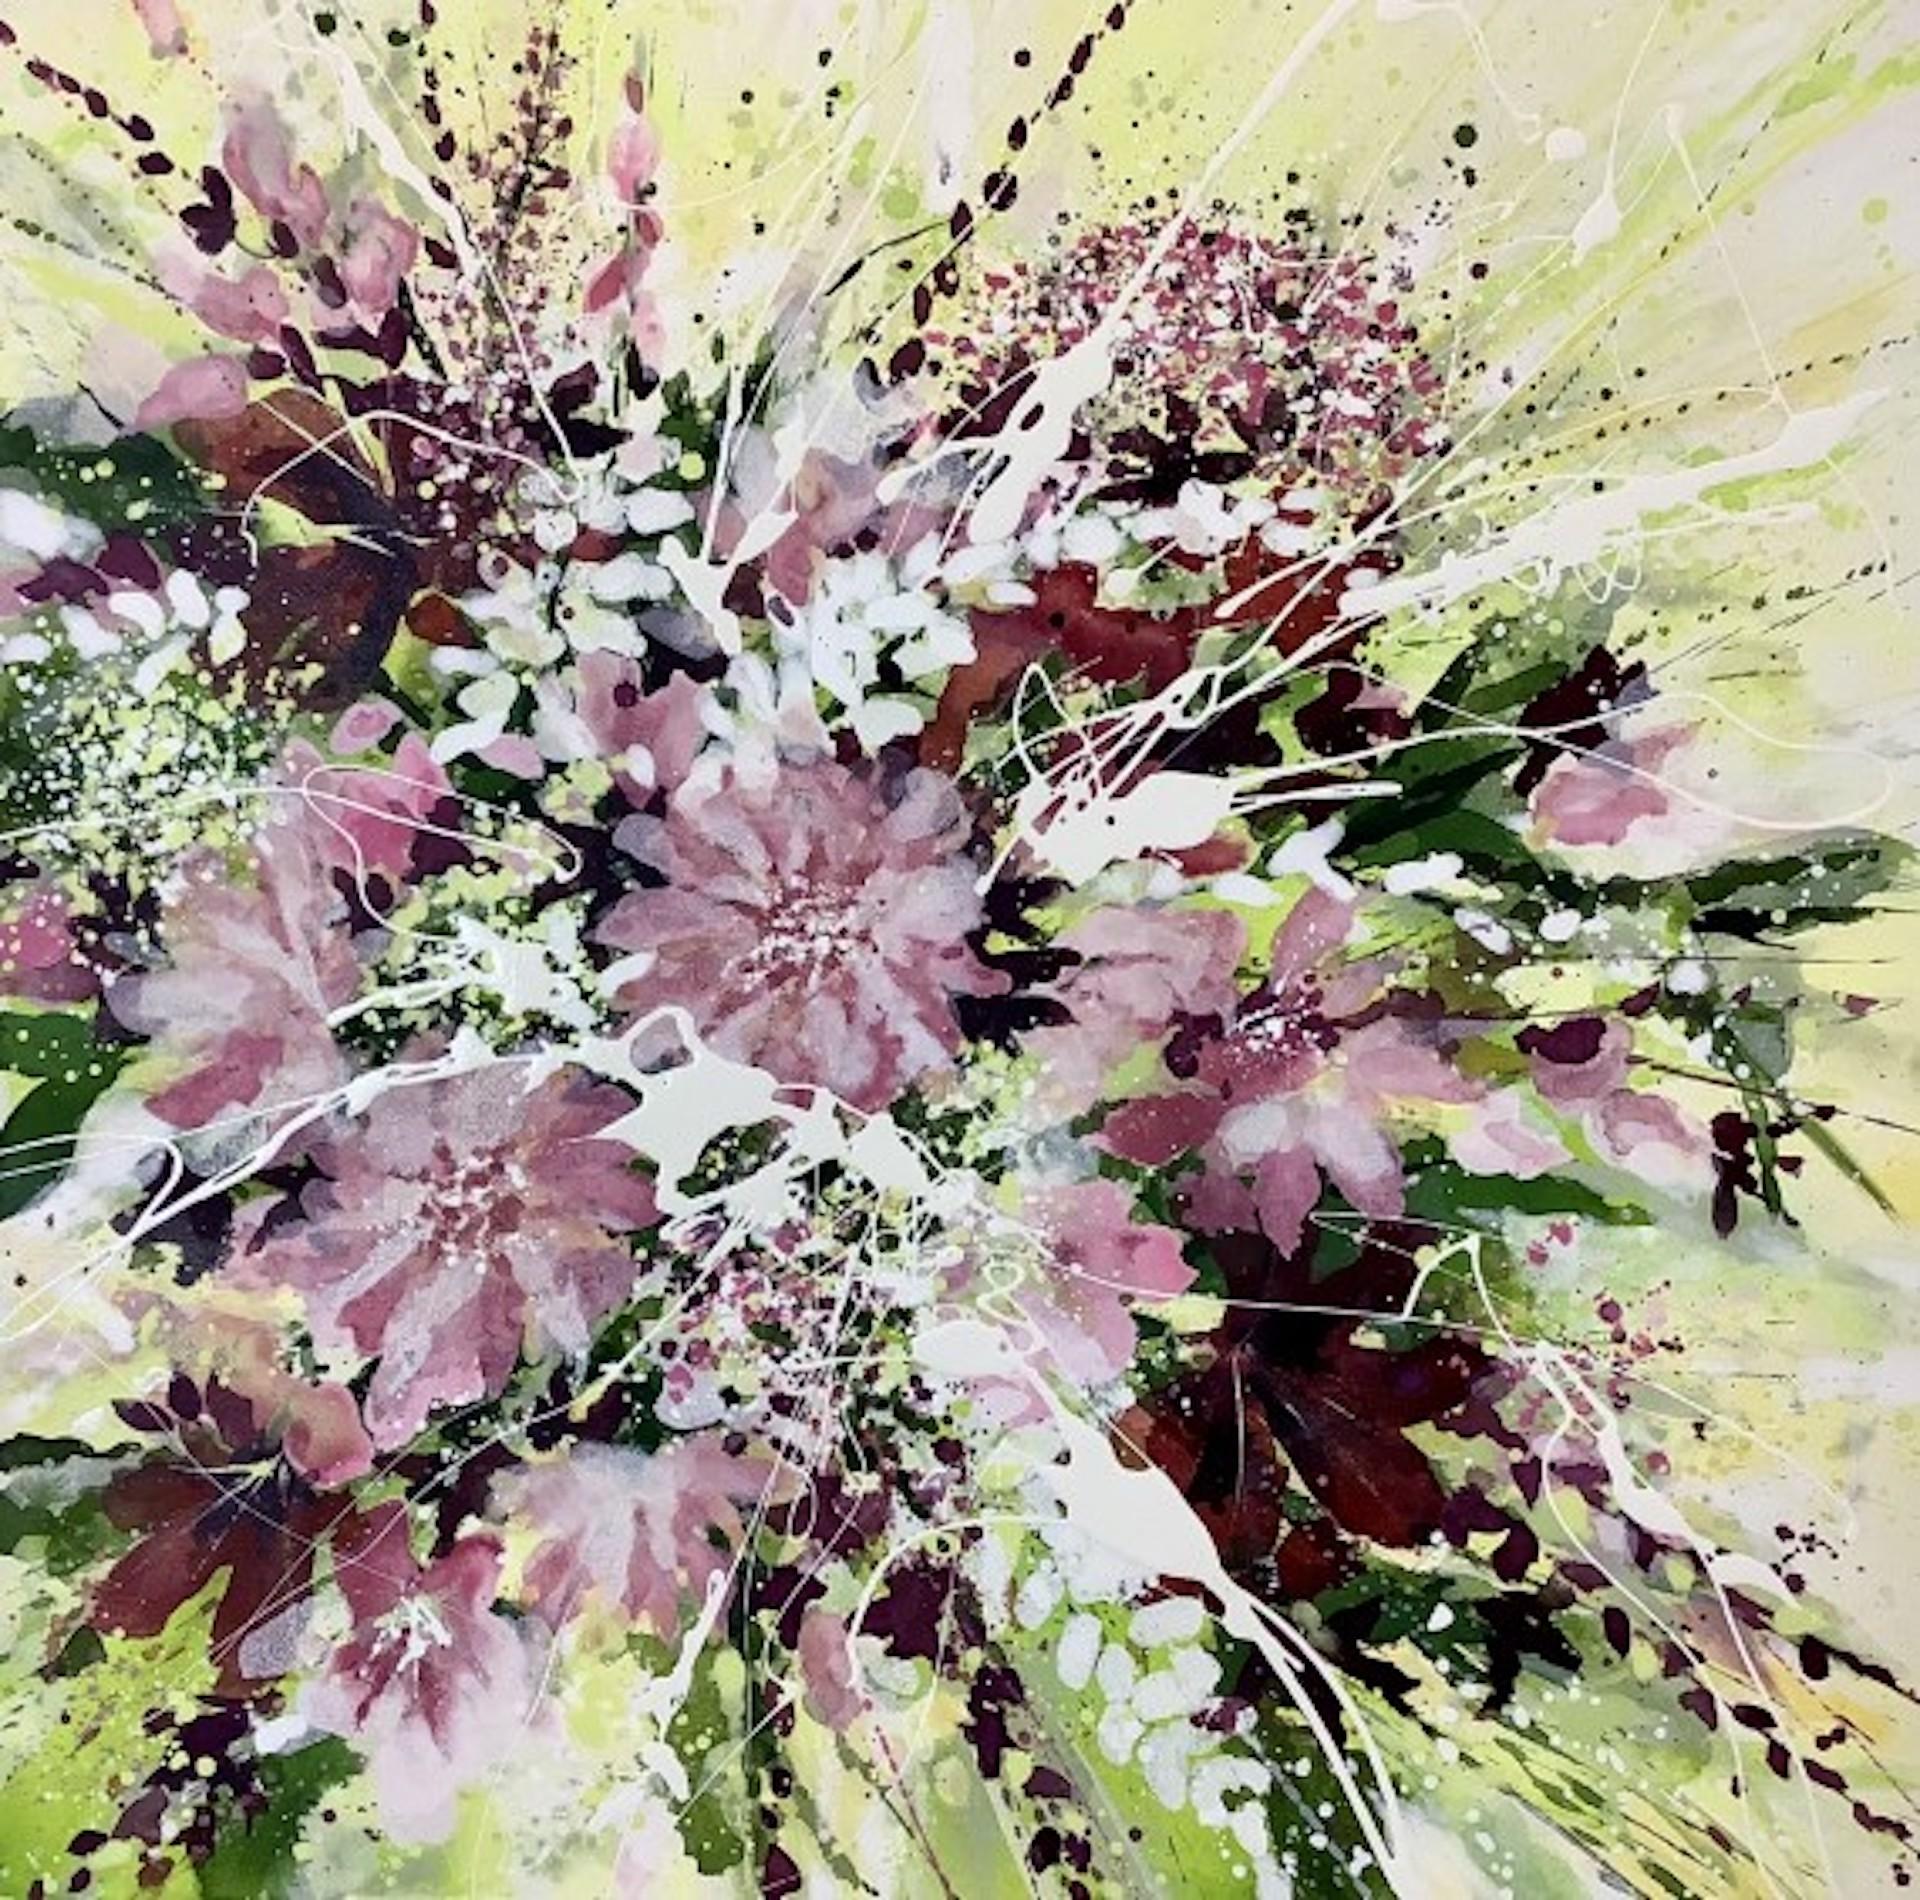 Adele Riley, Loves Hope, Contemporary Floral Painting, Original Art